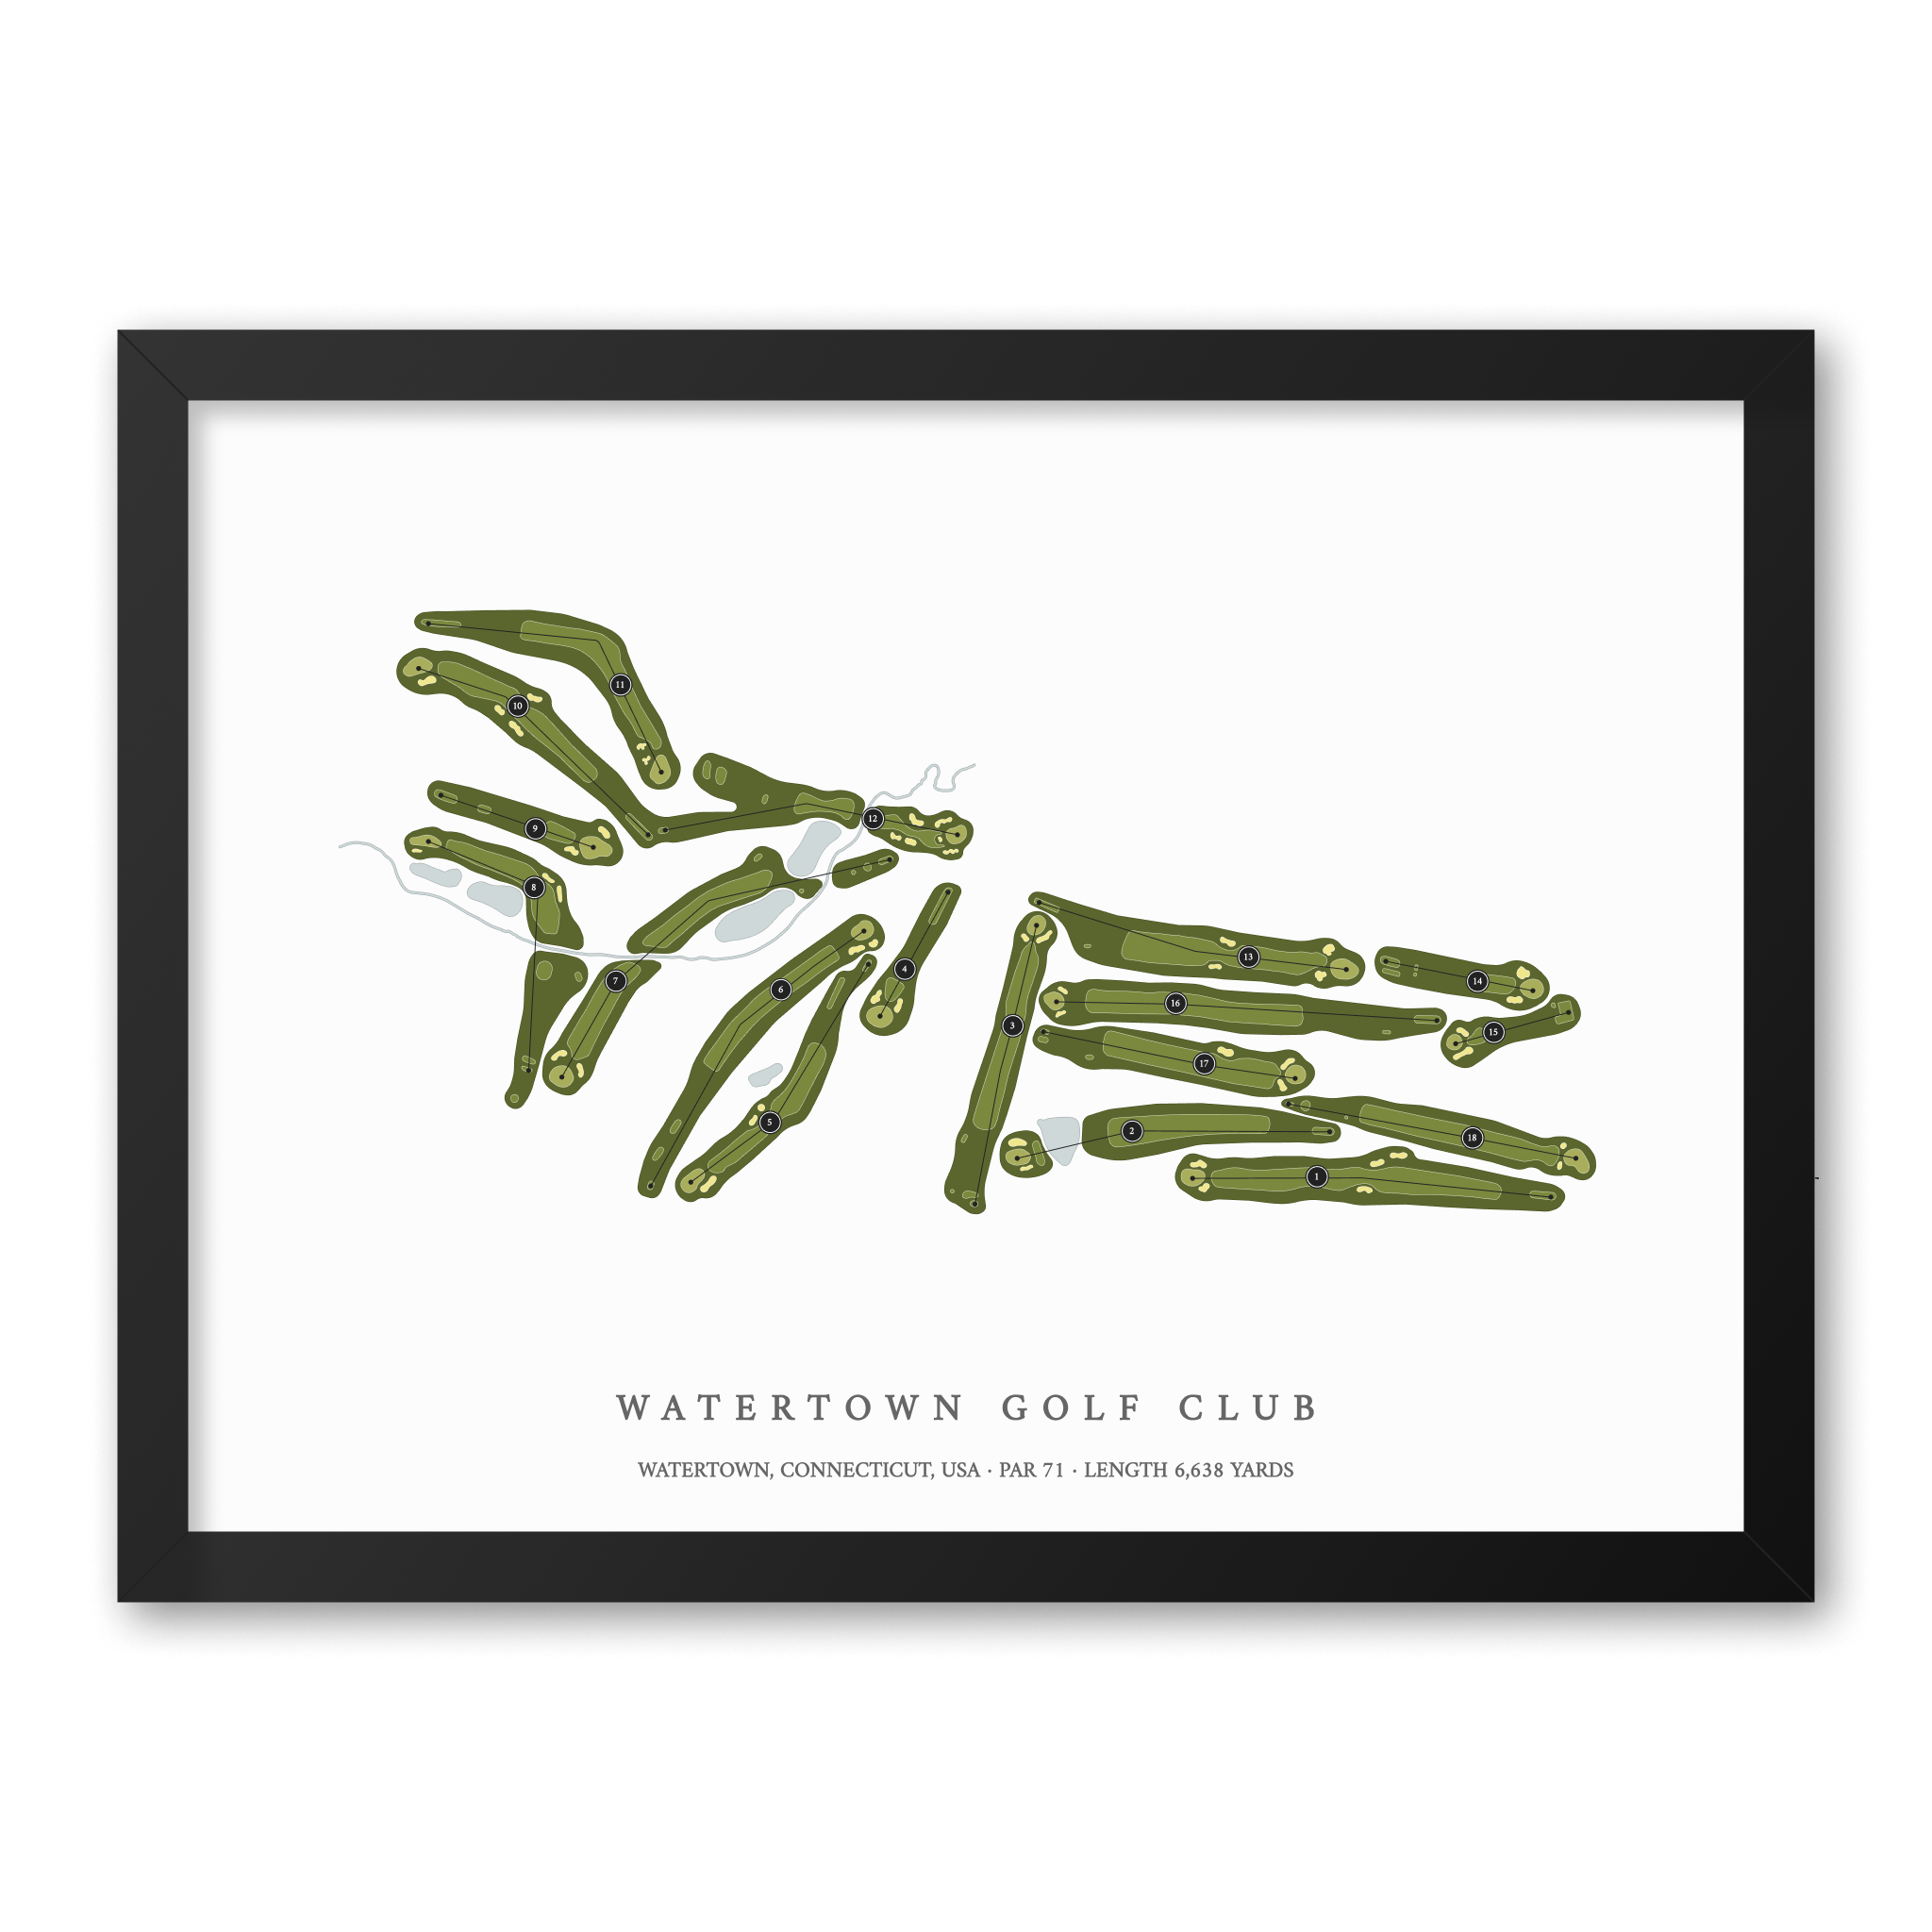 Watertown Golf Club| Golf Course Print | Black Frame With Hole Numbers #hole numbers_yes